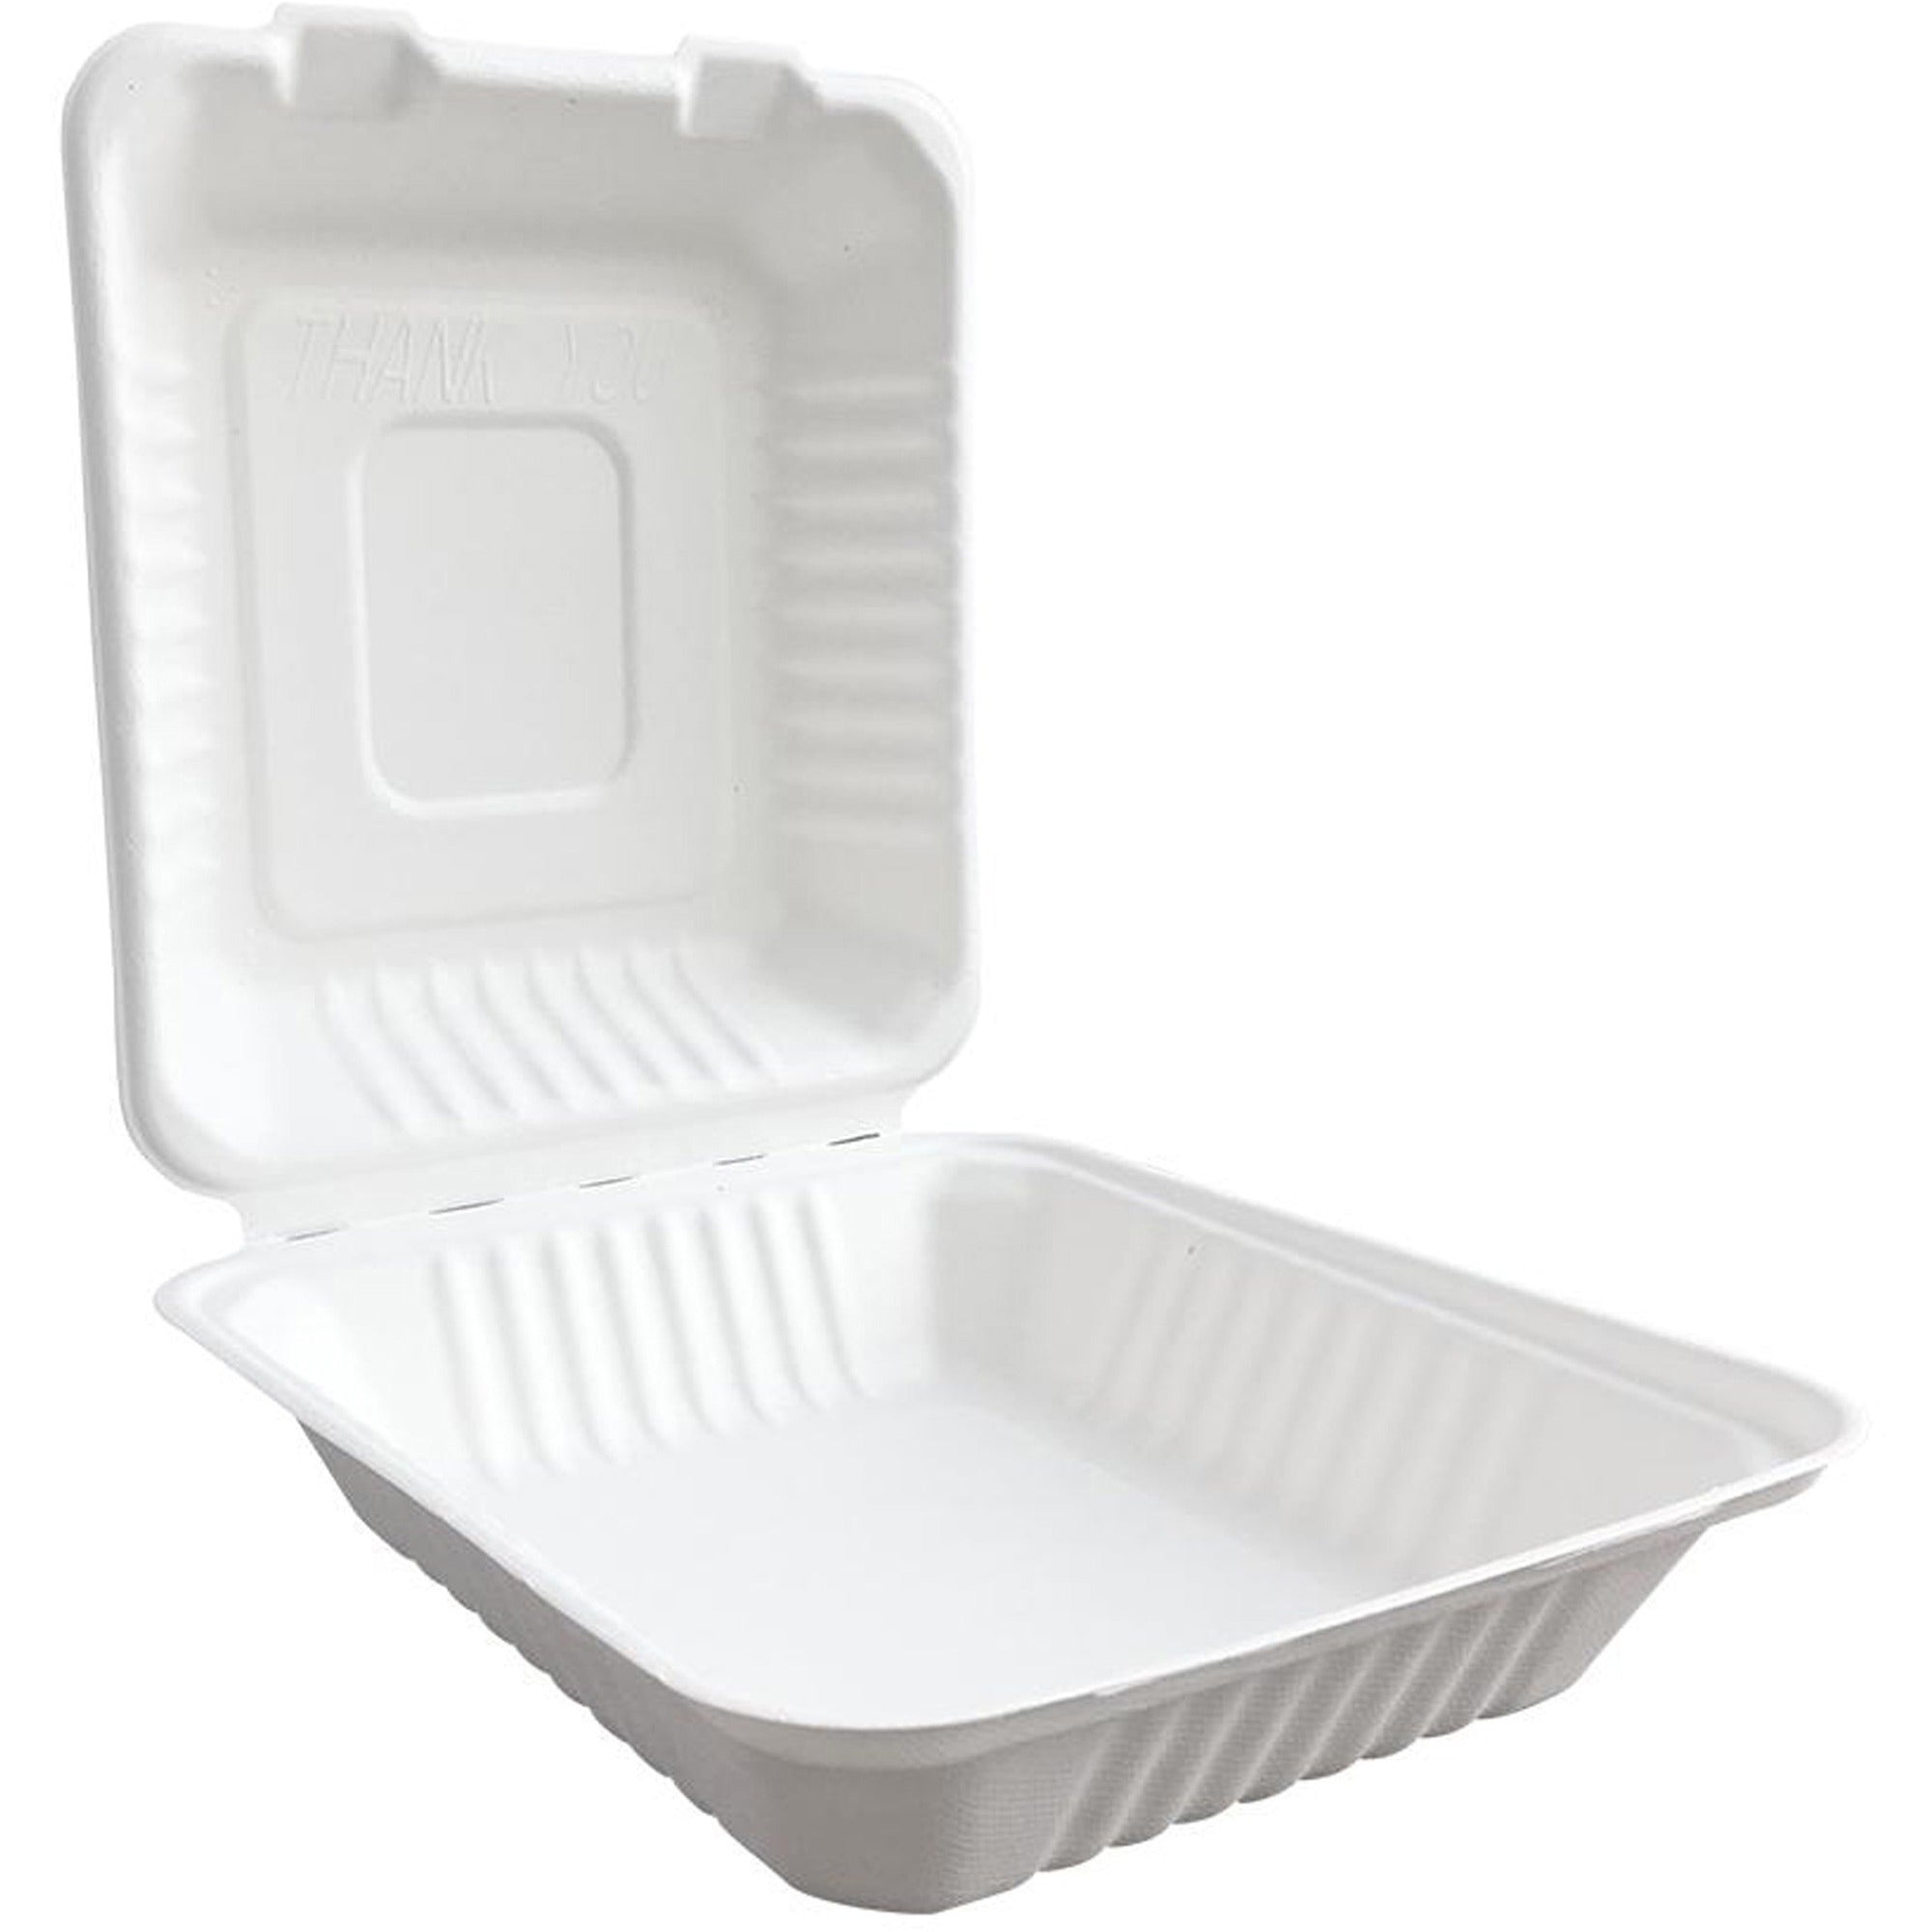 SEPG BE-FC88 Hinged Container - Food, Sandwich - Microwave Safe - Bagasse Body - 200 / Carton